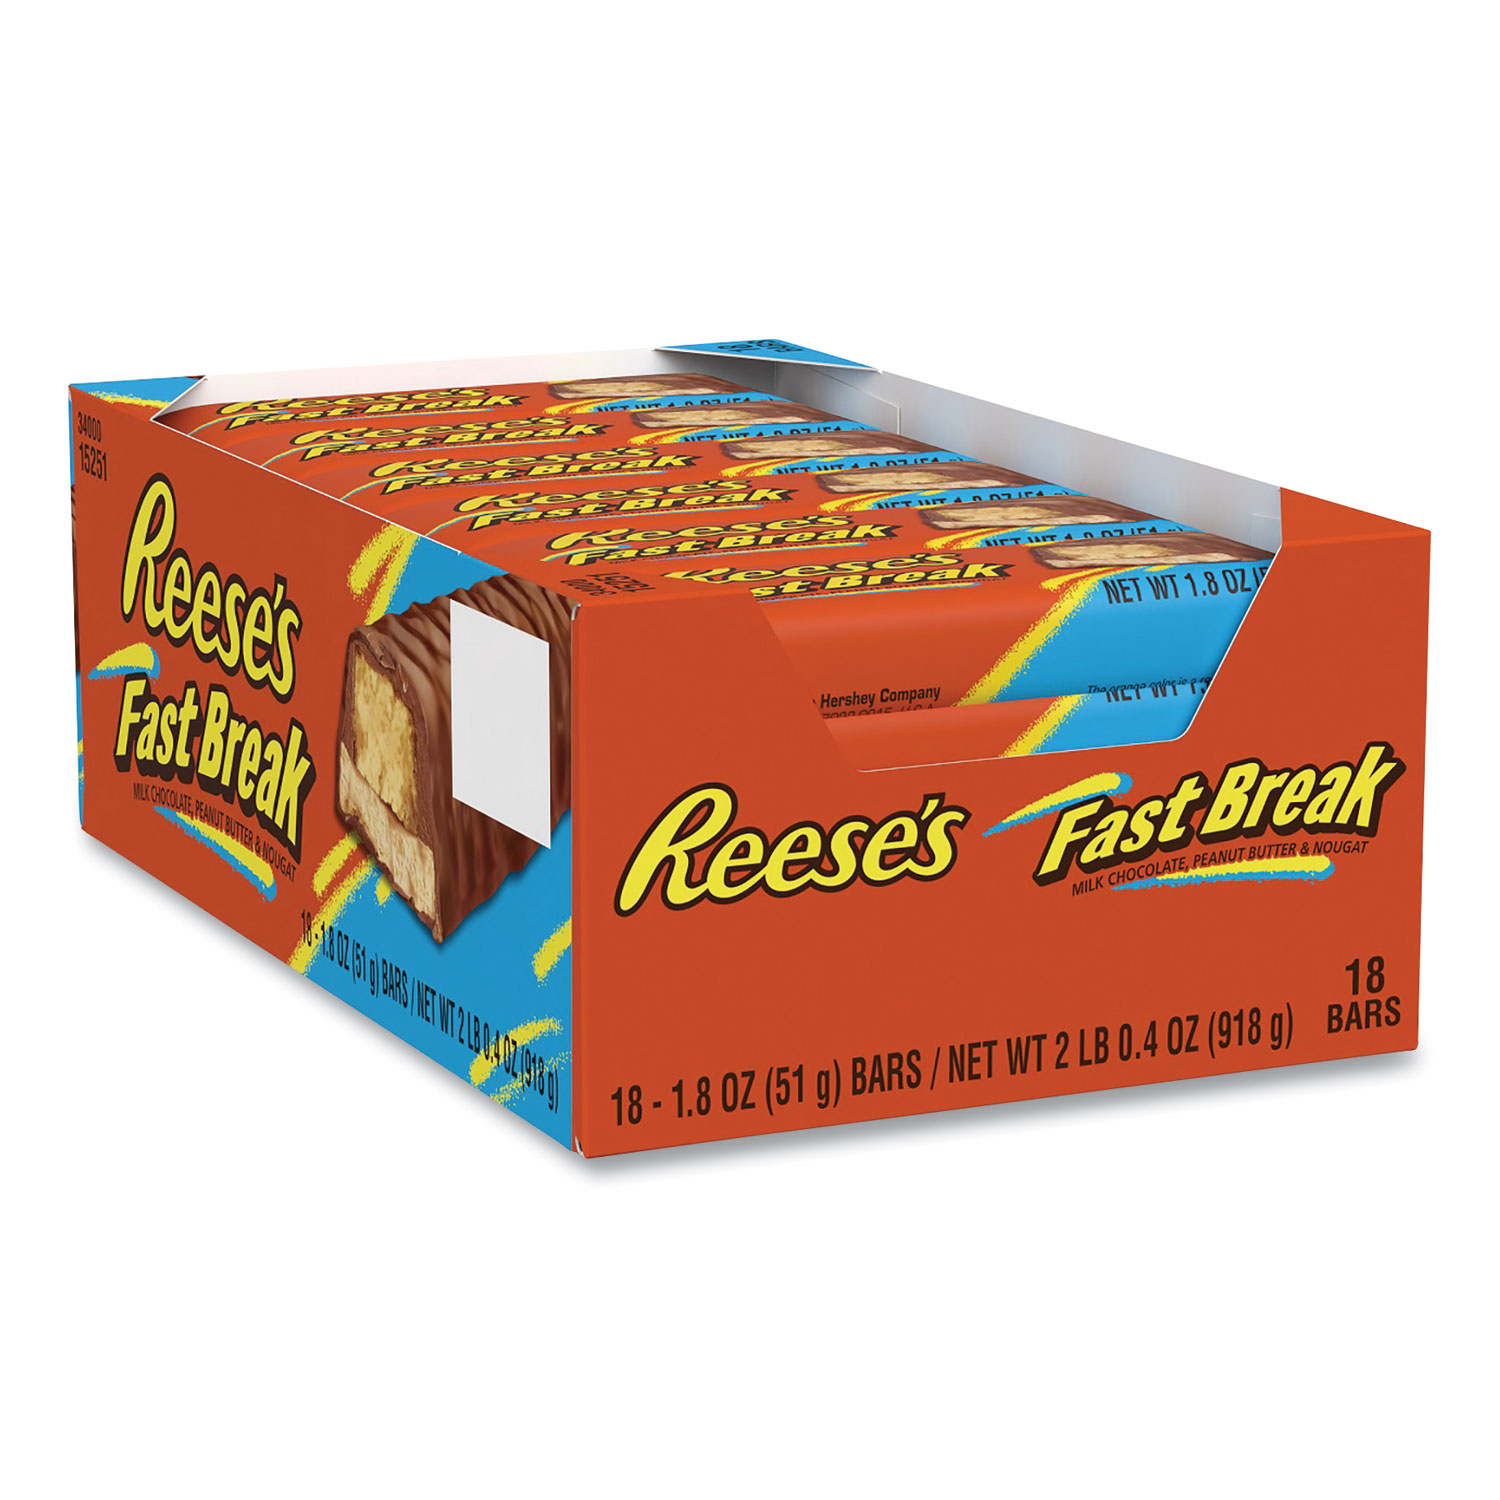  Reese's 15251 FAST BREAK Bar, 1.8 oz Bar, 18 Bars/Box, Free Delivery in 1-4 Business Days (GRR24600184) 